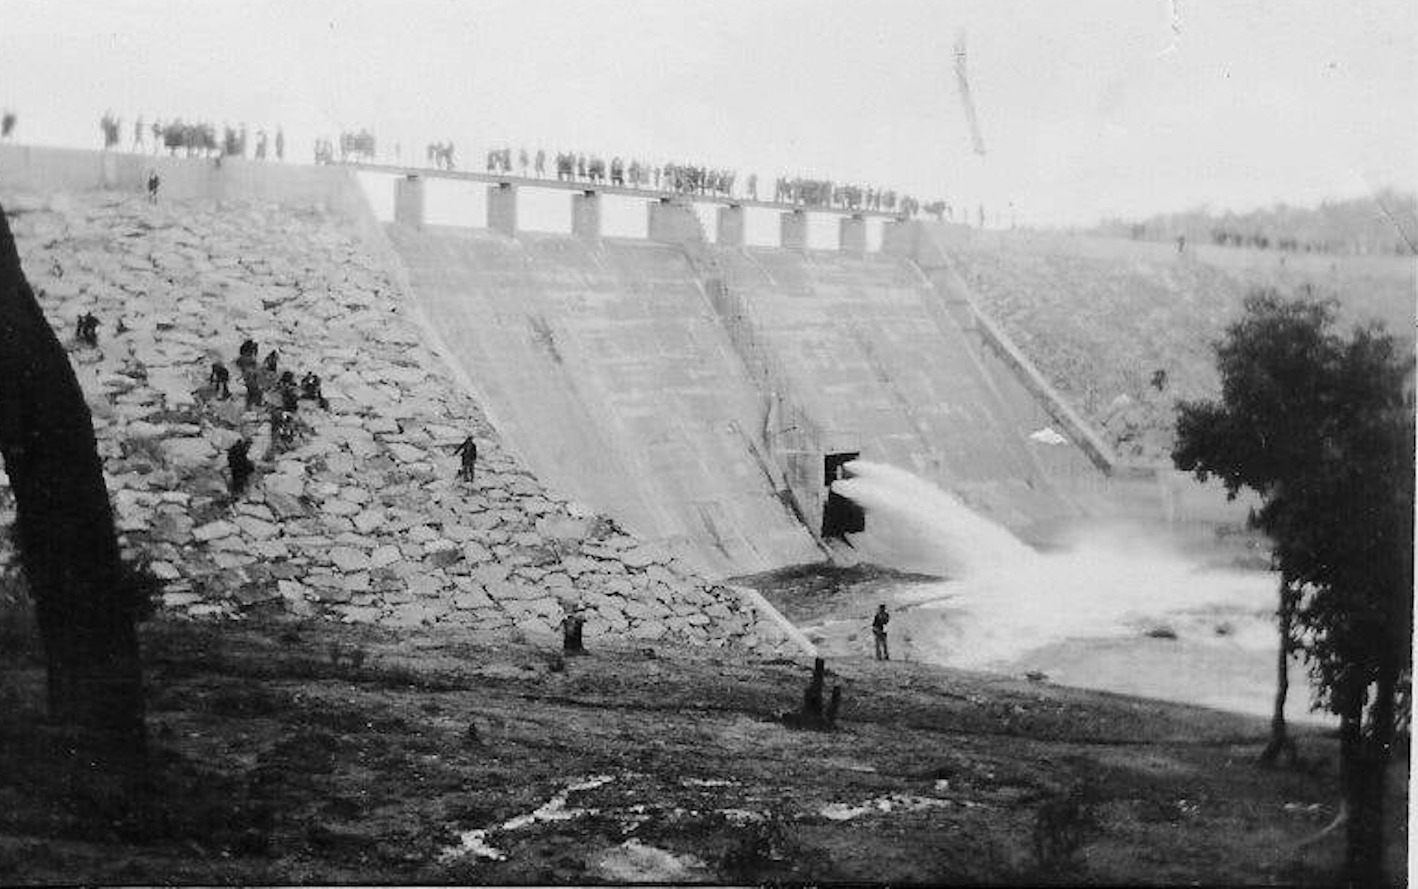 Harvey-Hike-1939-showing-the-weir-with-a-raised-wall-Crefit-Nathan-King.jpg